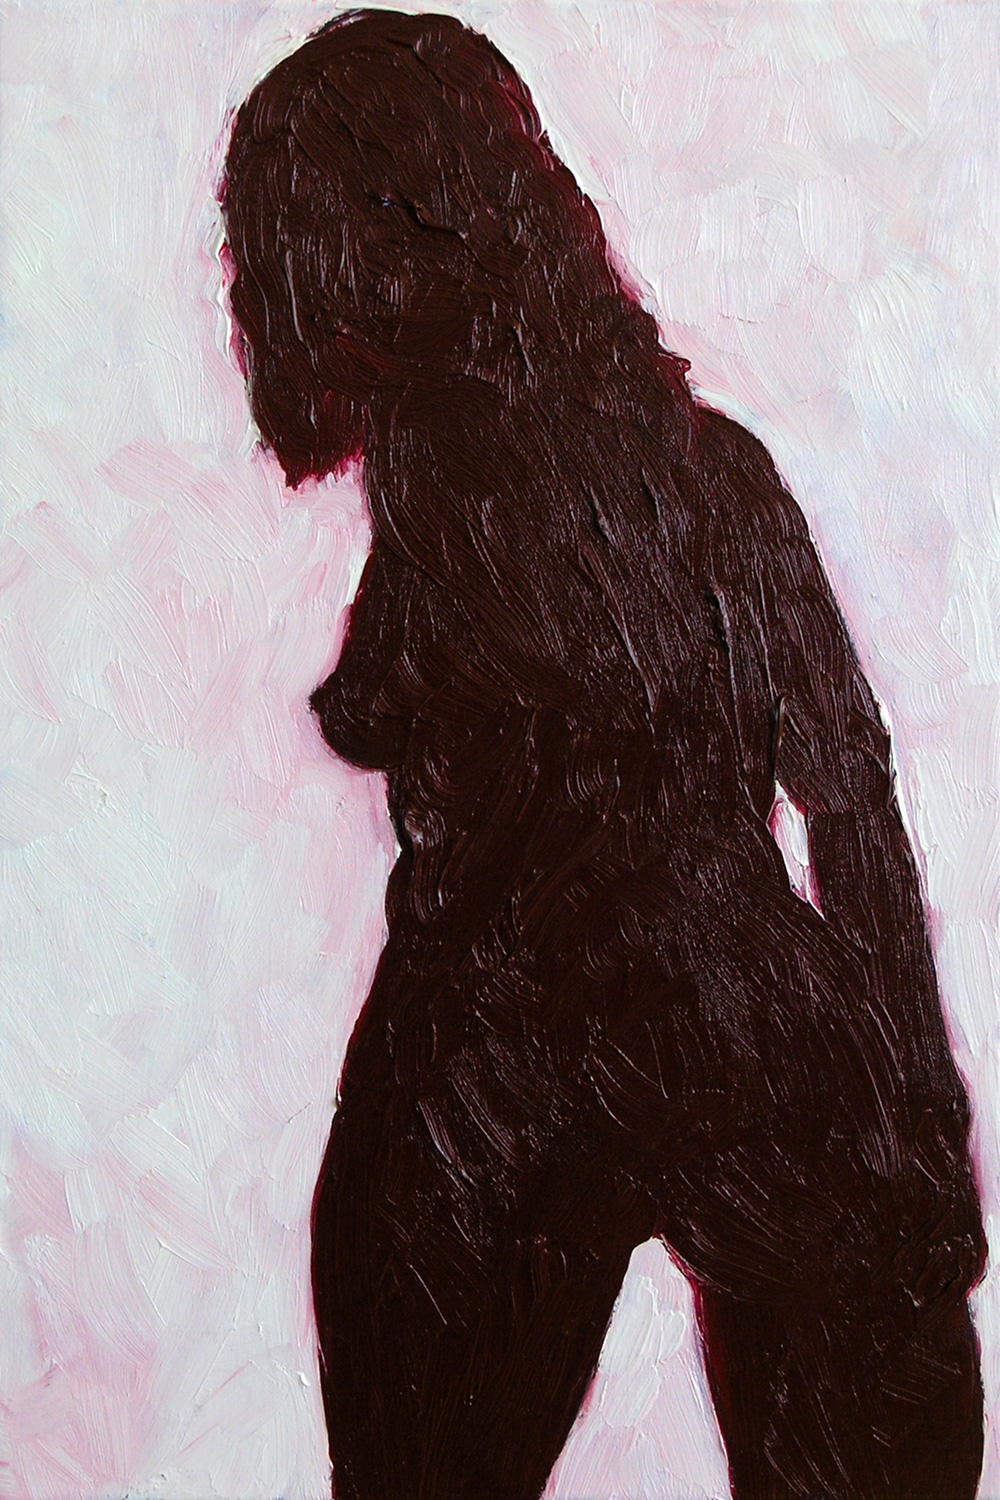 Nude in Dark Red, a painting by Guido Vrolix